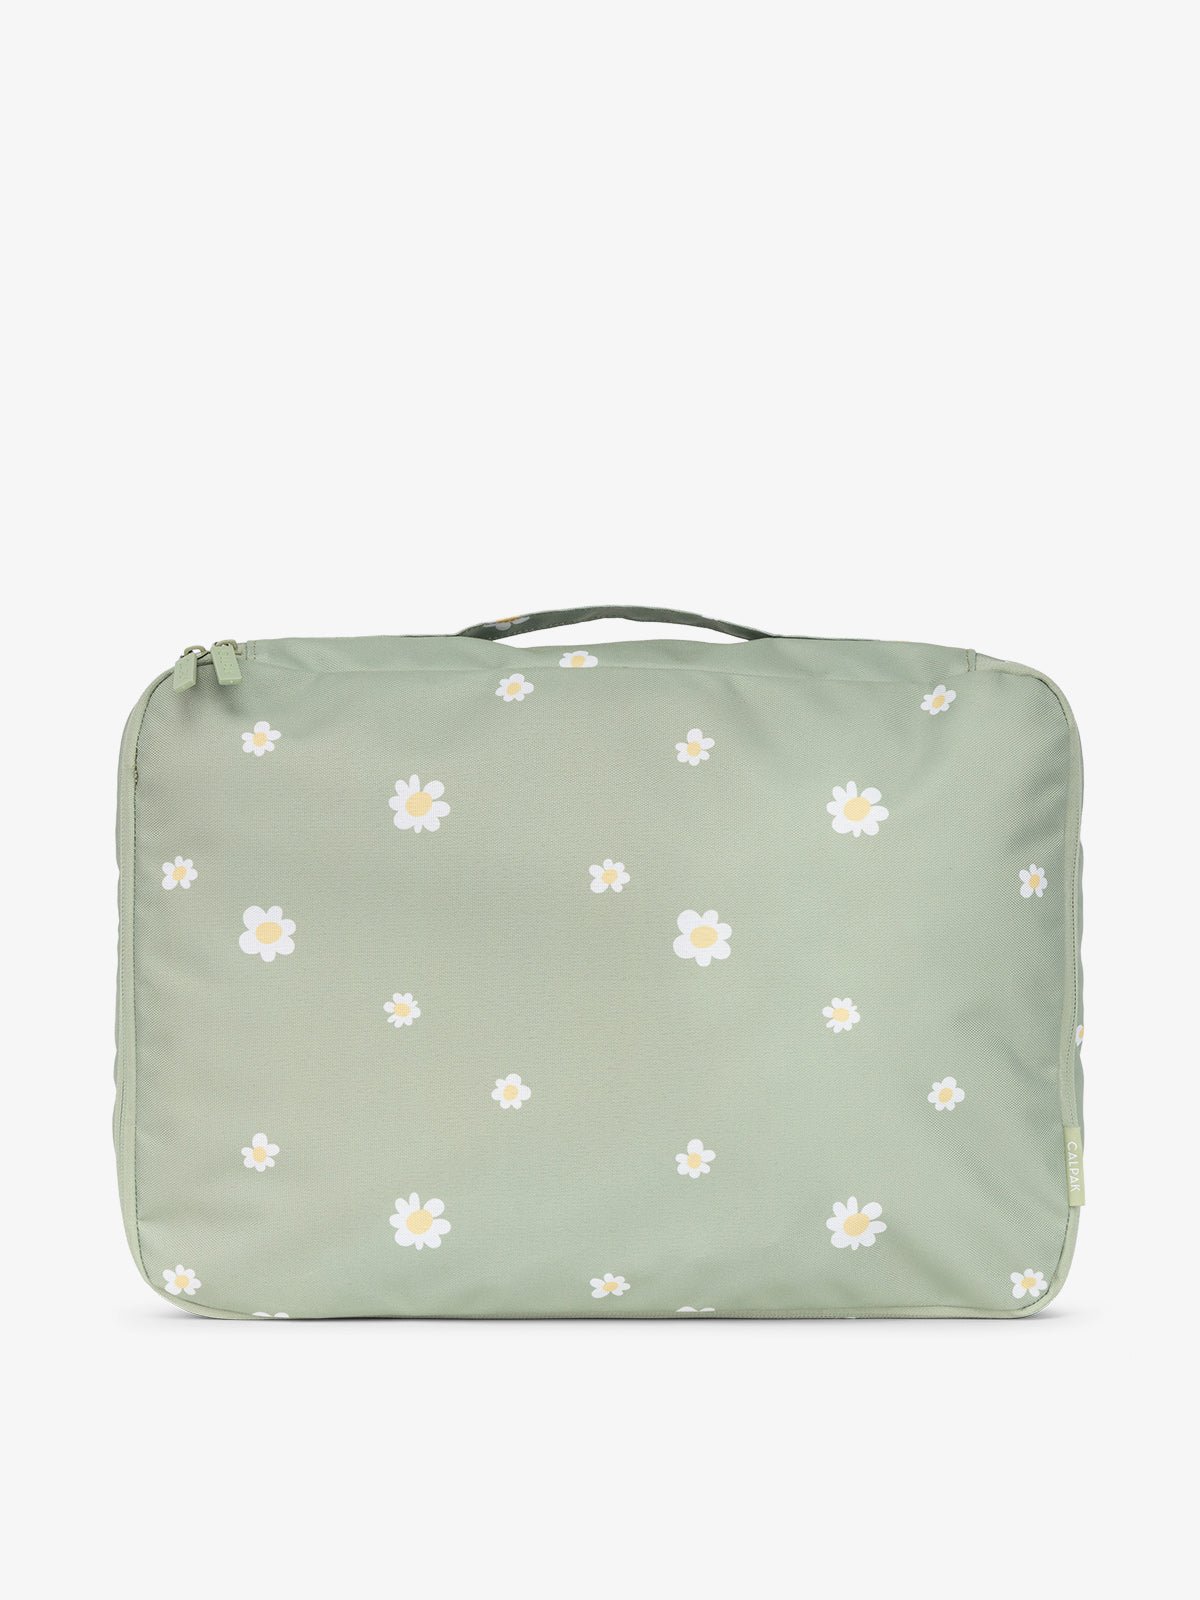 CALPAK large packing cubes with top handle in green floral print